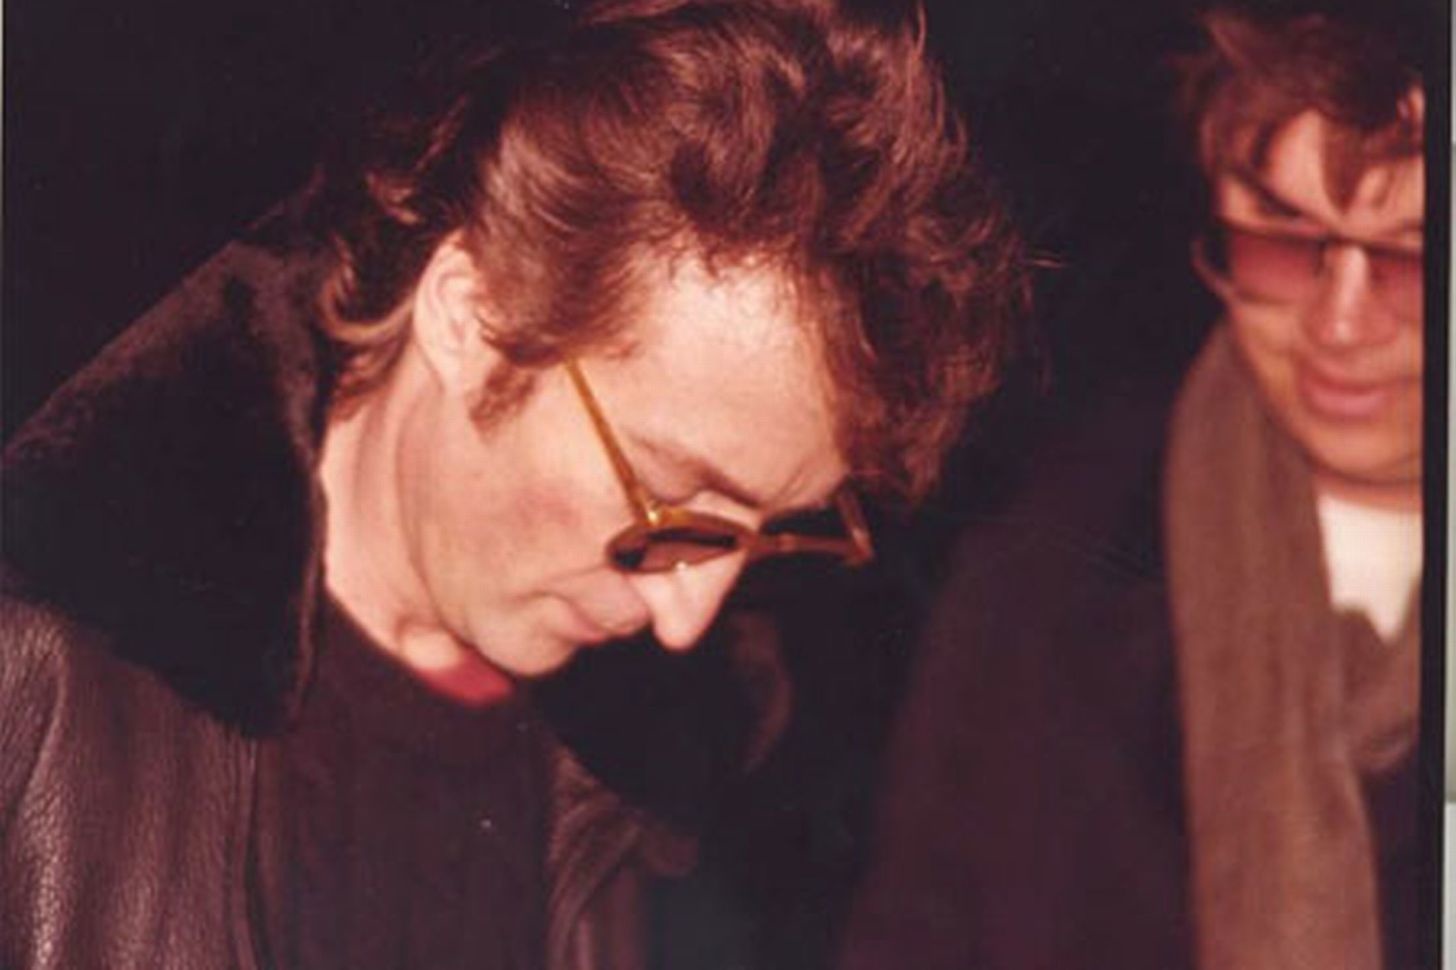 John Lennon.
An ironic last photo of John Lennon signing an autograph for the man who turned out to be his killer (man on the right of the photo). Lennon was fatally shot on December 8, 1980, Manhattan, New York.